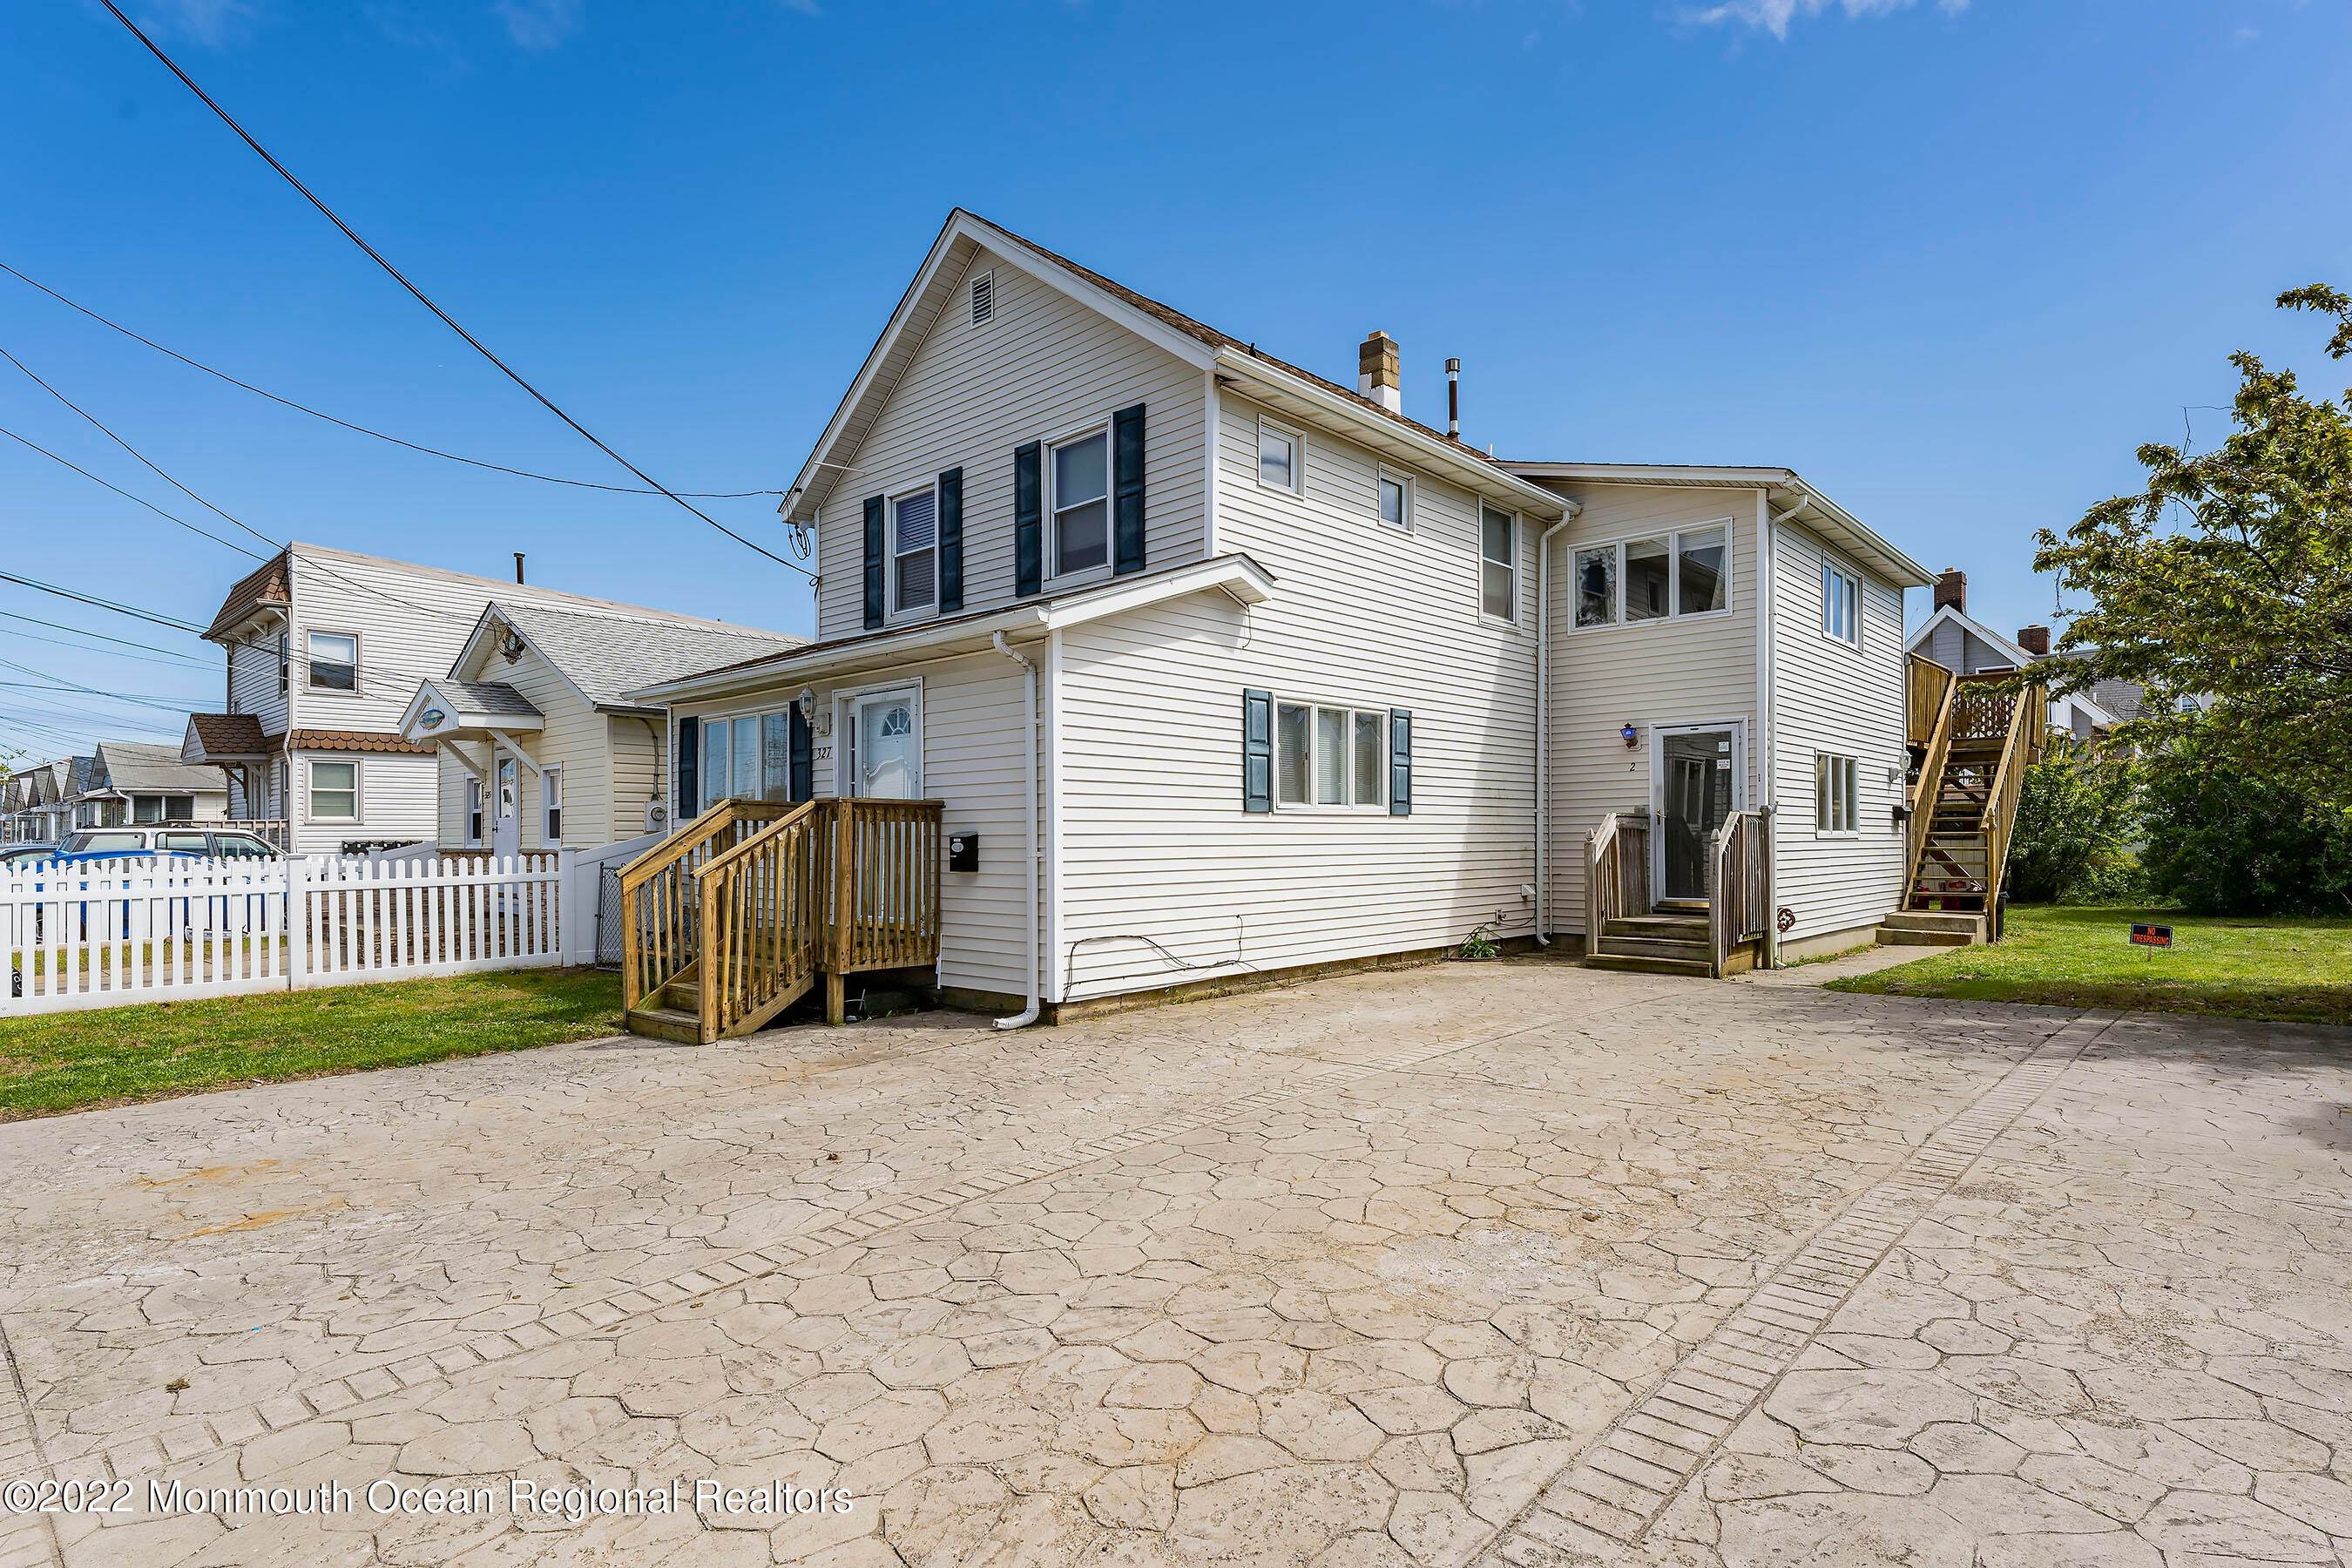 2. Condominiums for Sale at 327 Grant Avenue Seaside Heights, New Jersey 08751 United States